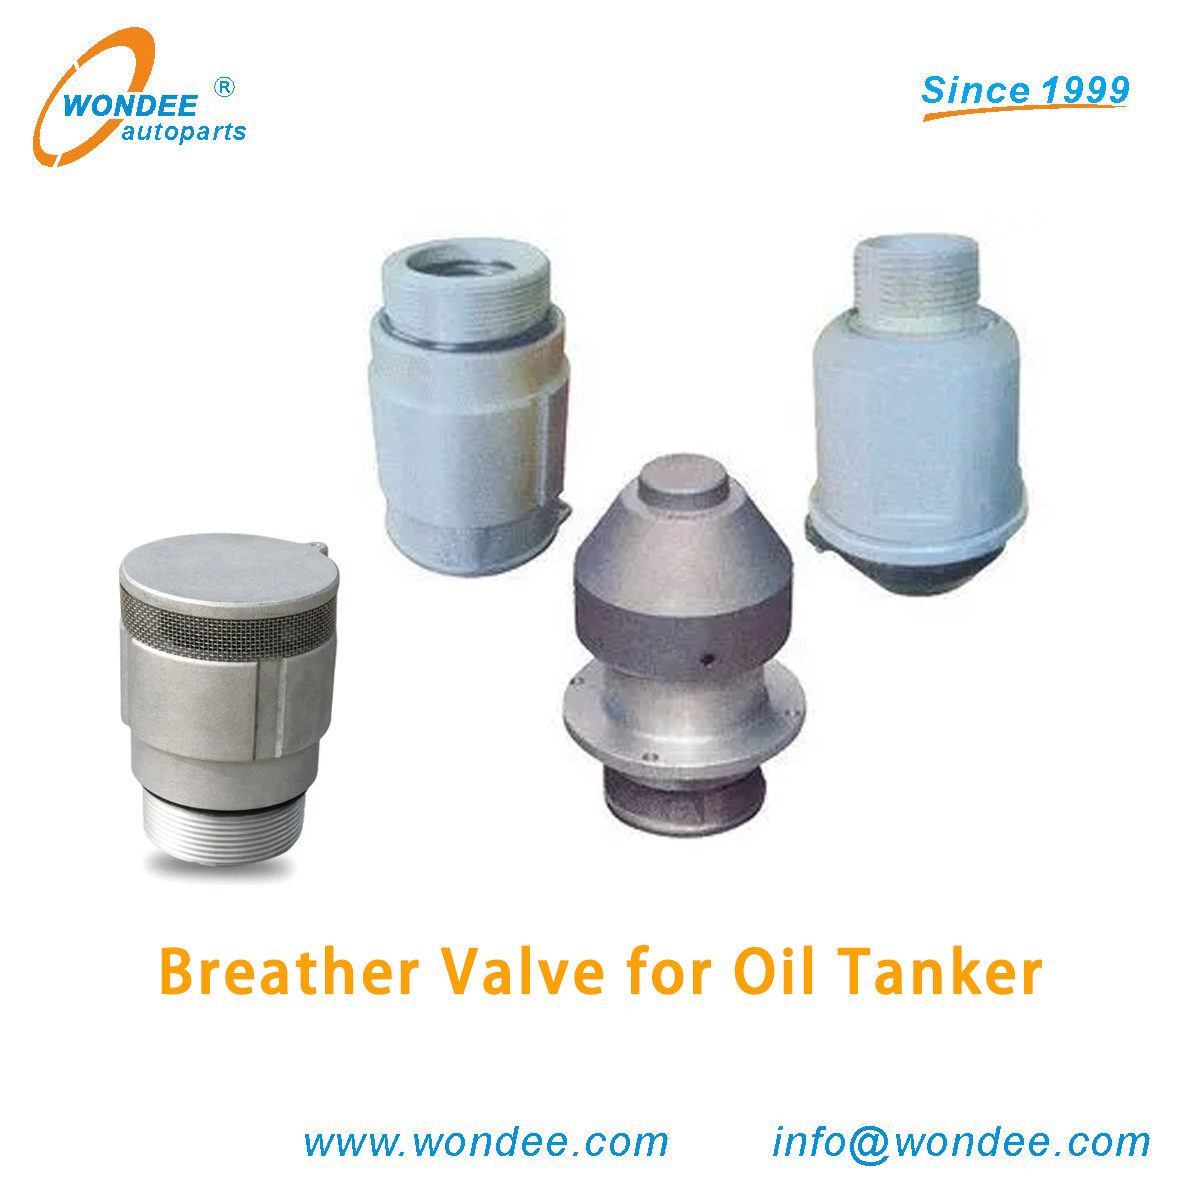 Introduction of Oil Tank’s Breather Valve